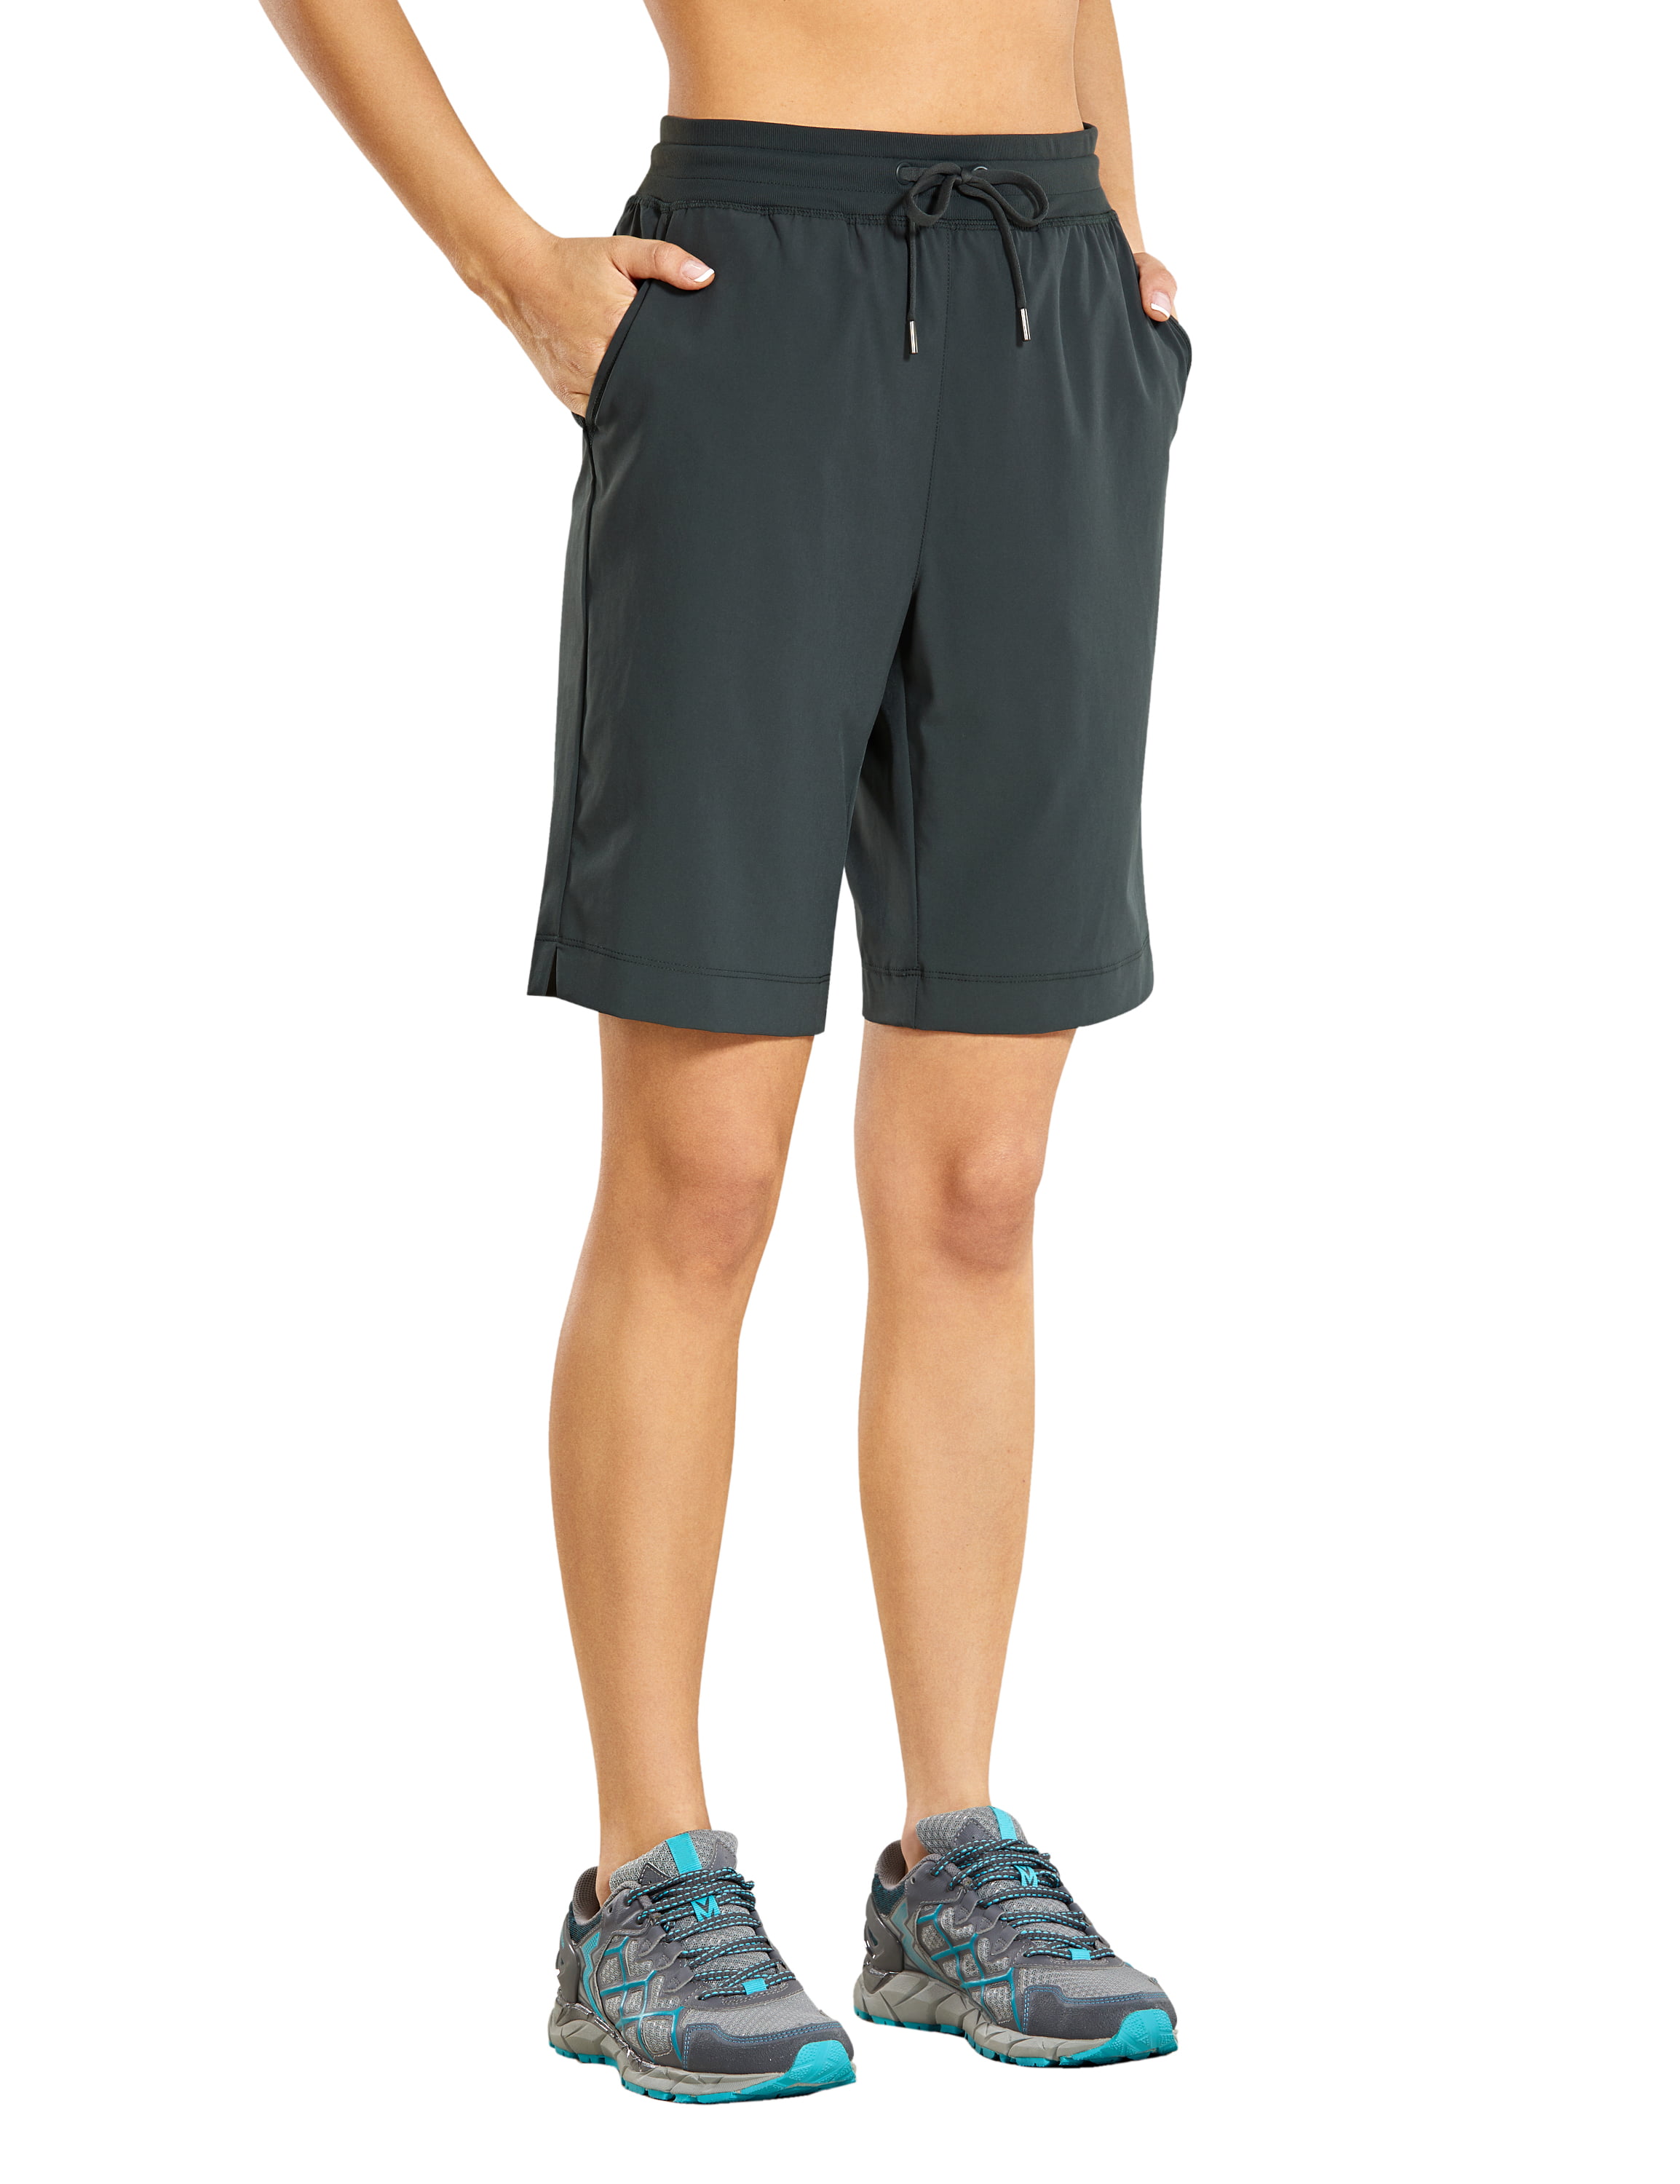 CRZ YOGA Womens Medium Rise Relaxed Fit Sports Shorts with Pockets 2.5 Inches